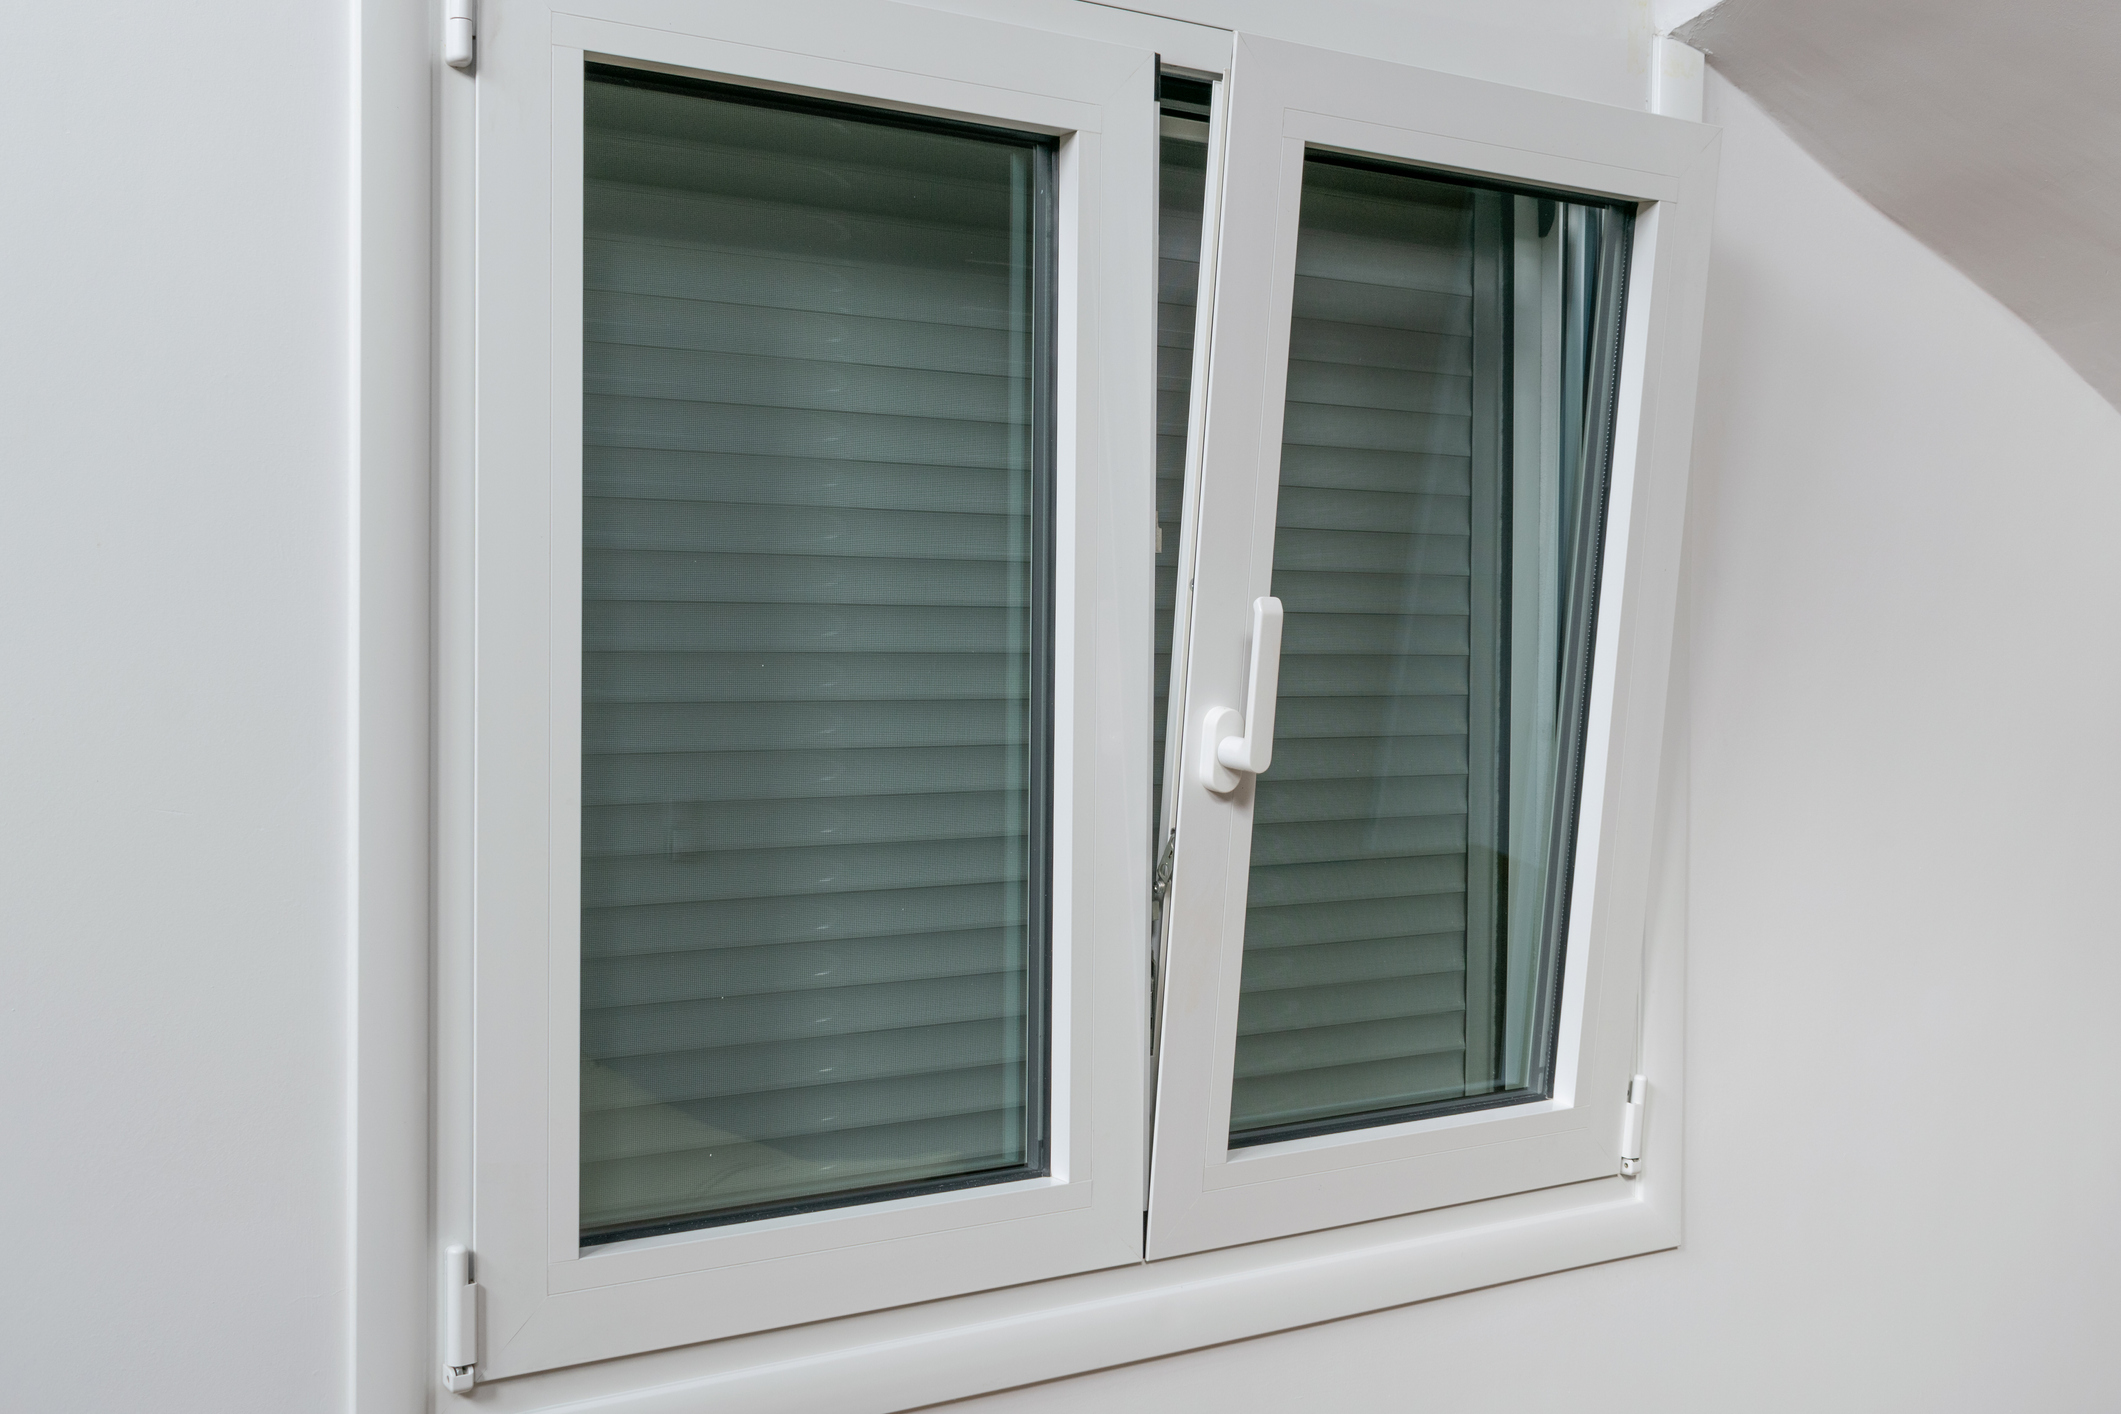 Learn What to Look for in Energy-Efficient Casement Windows